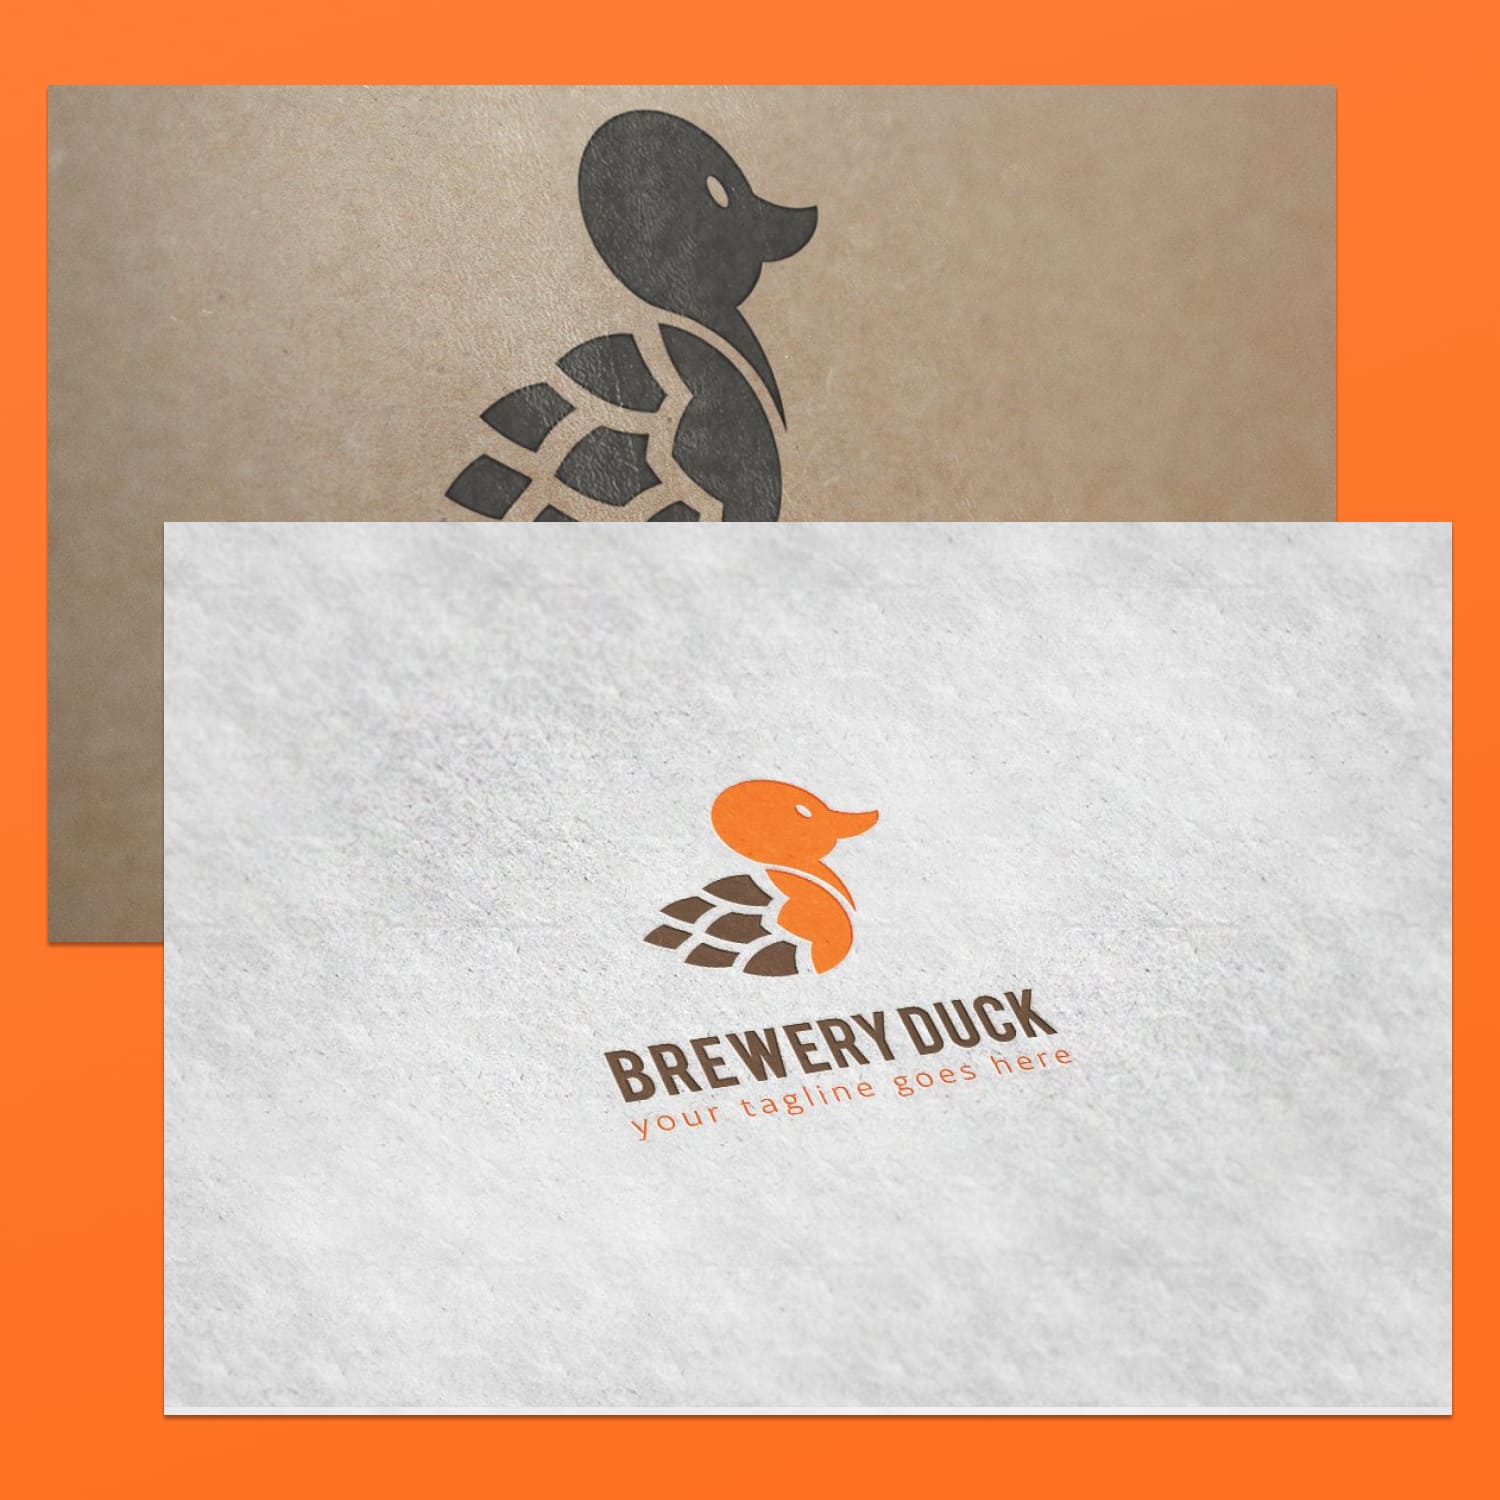 brewery duck logo template cover.